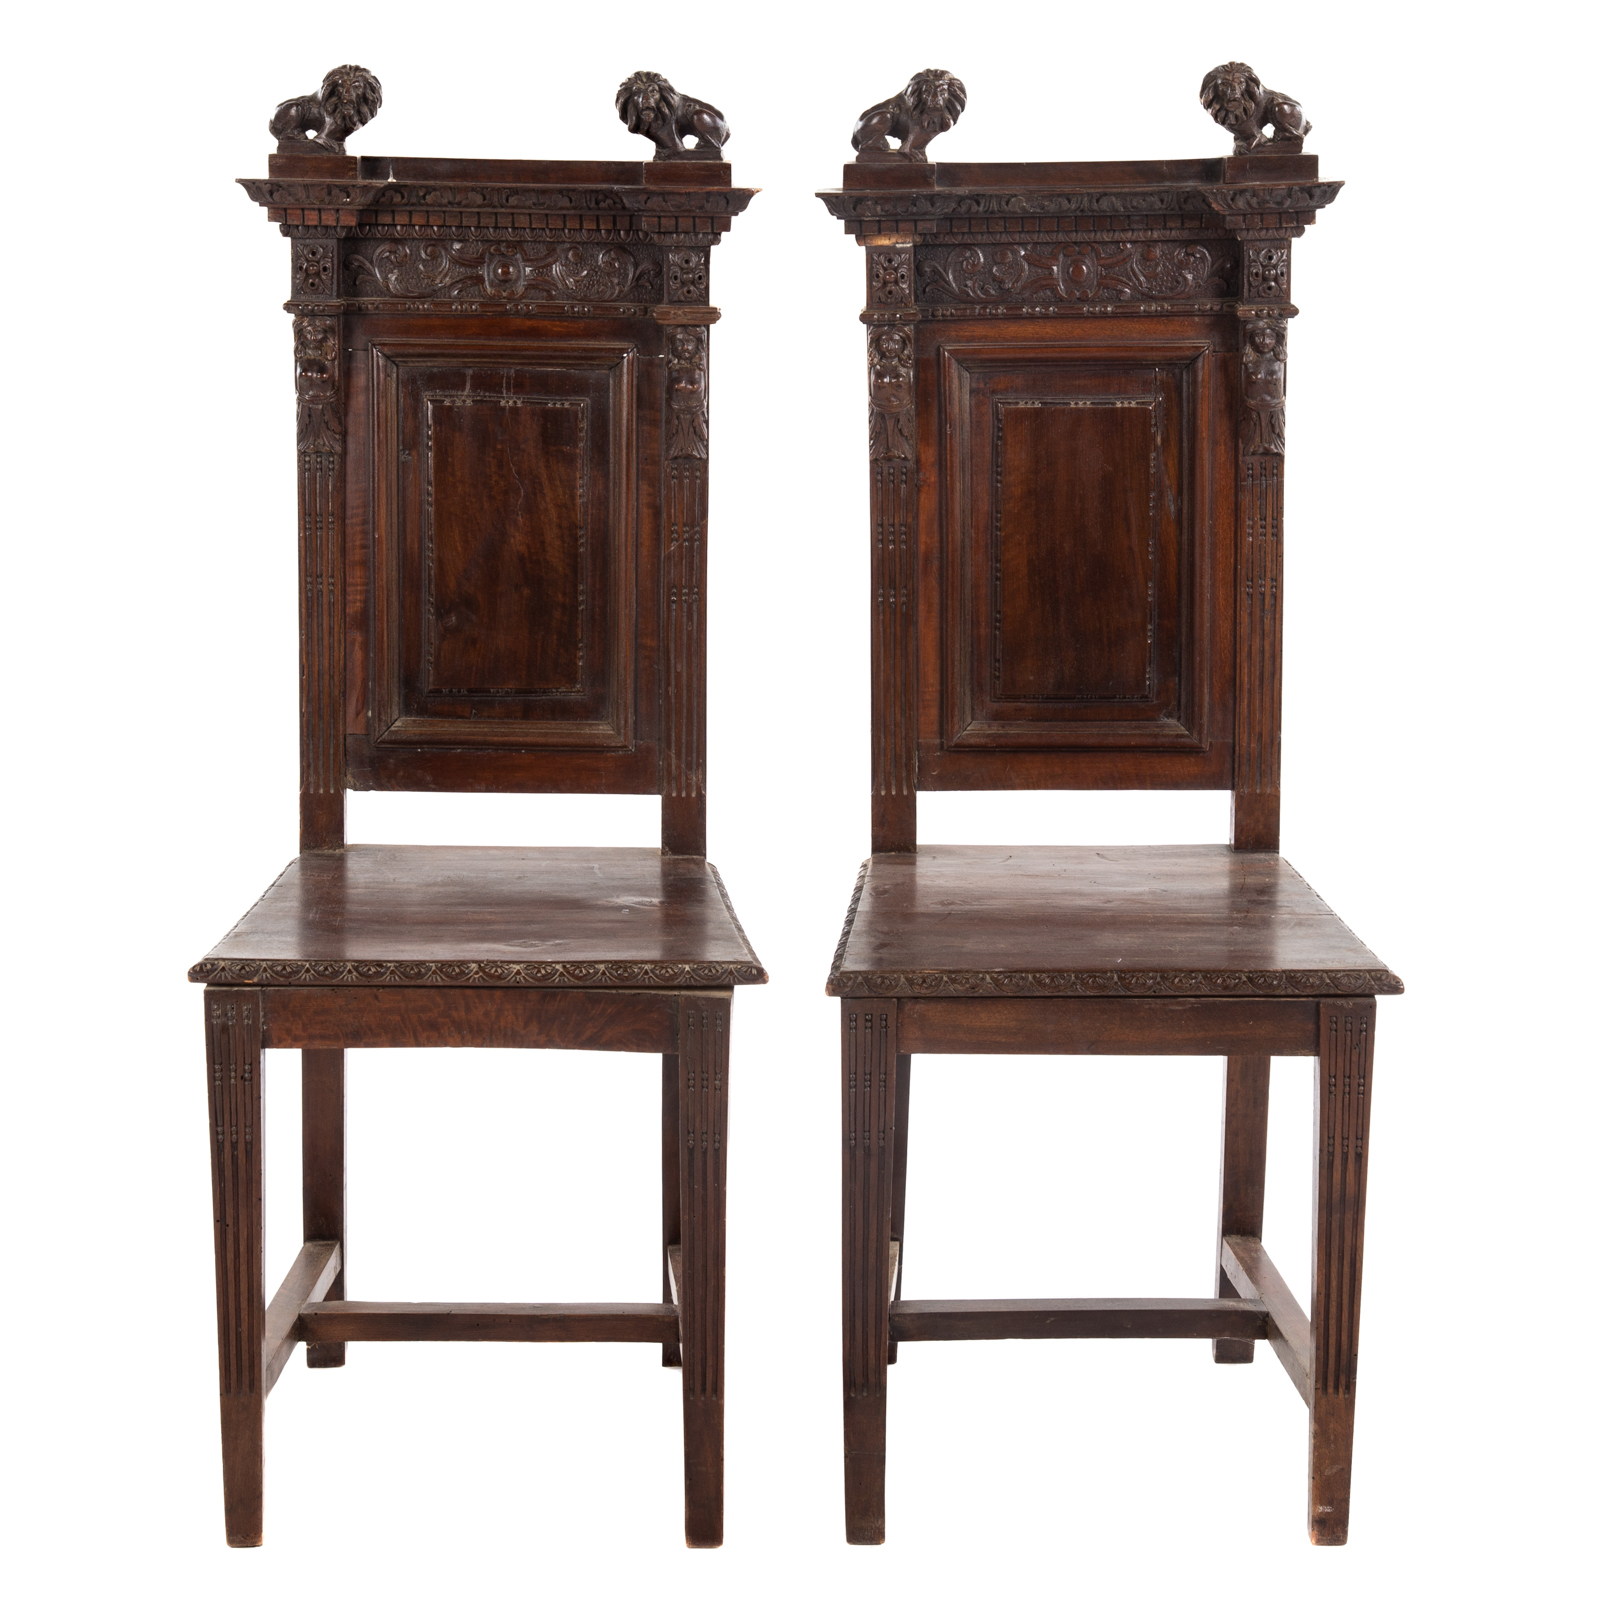 A PAIR OF RENAISSANCE REVIVAL CARVED